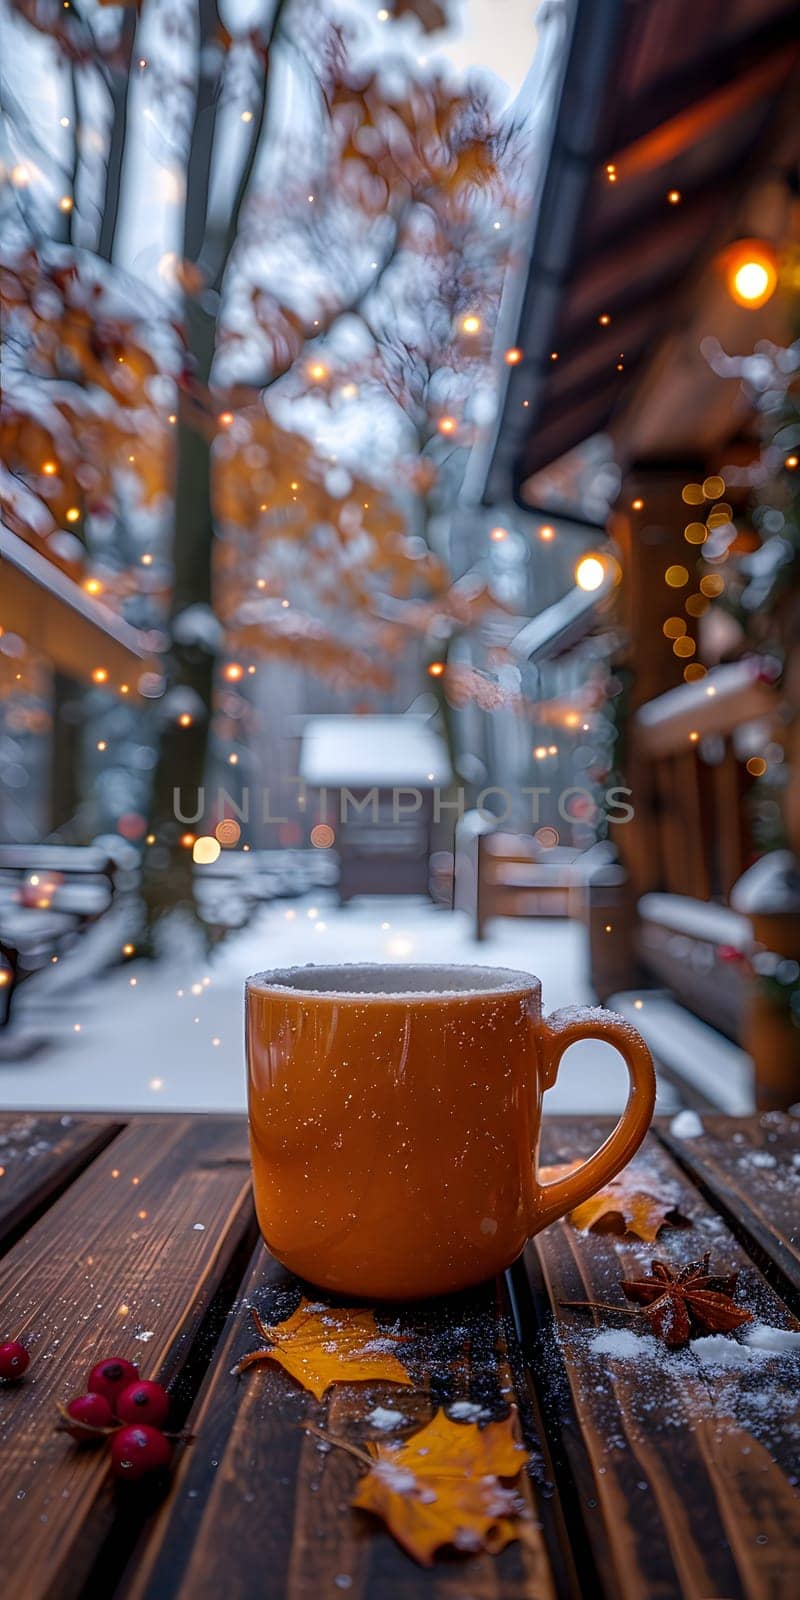 A coffee cup is placed on a wooden table in the snowy setting by Nadtochiy